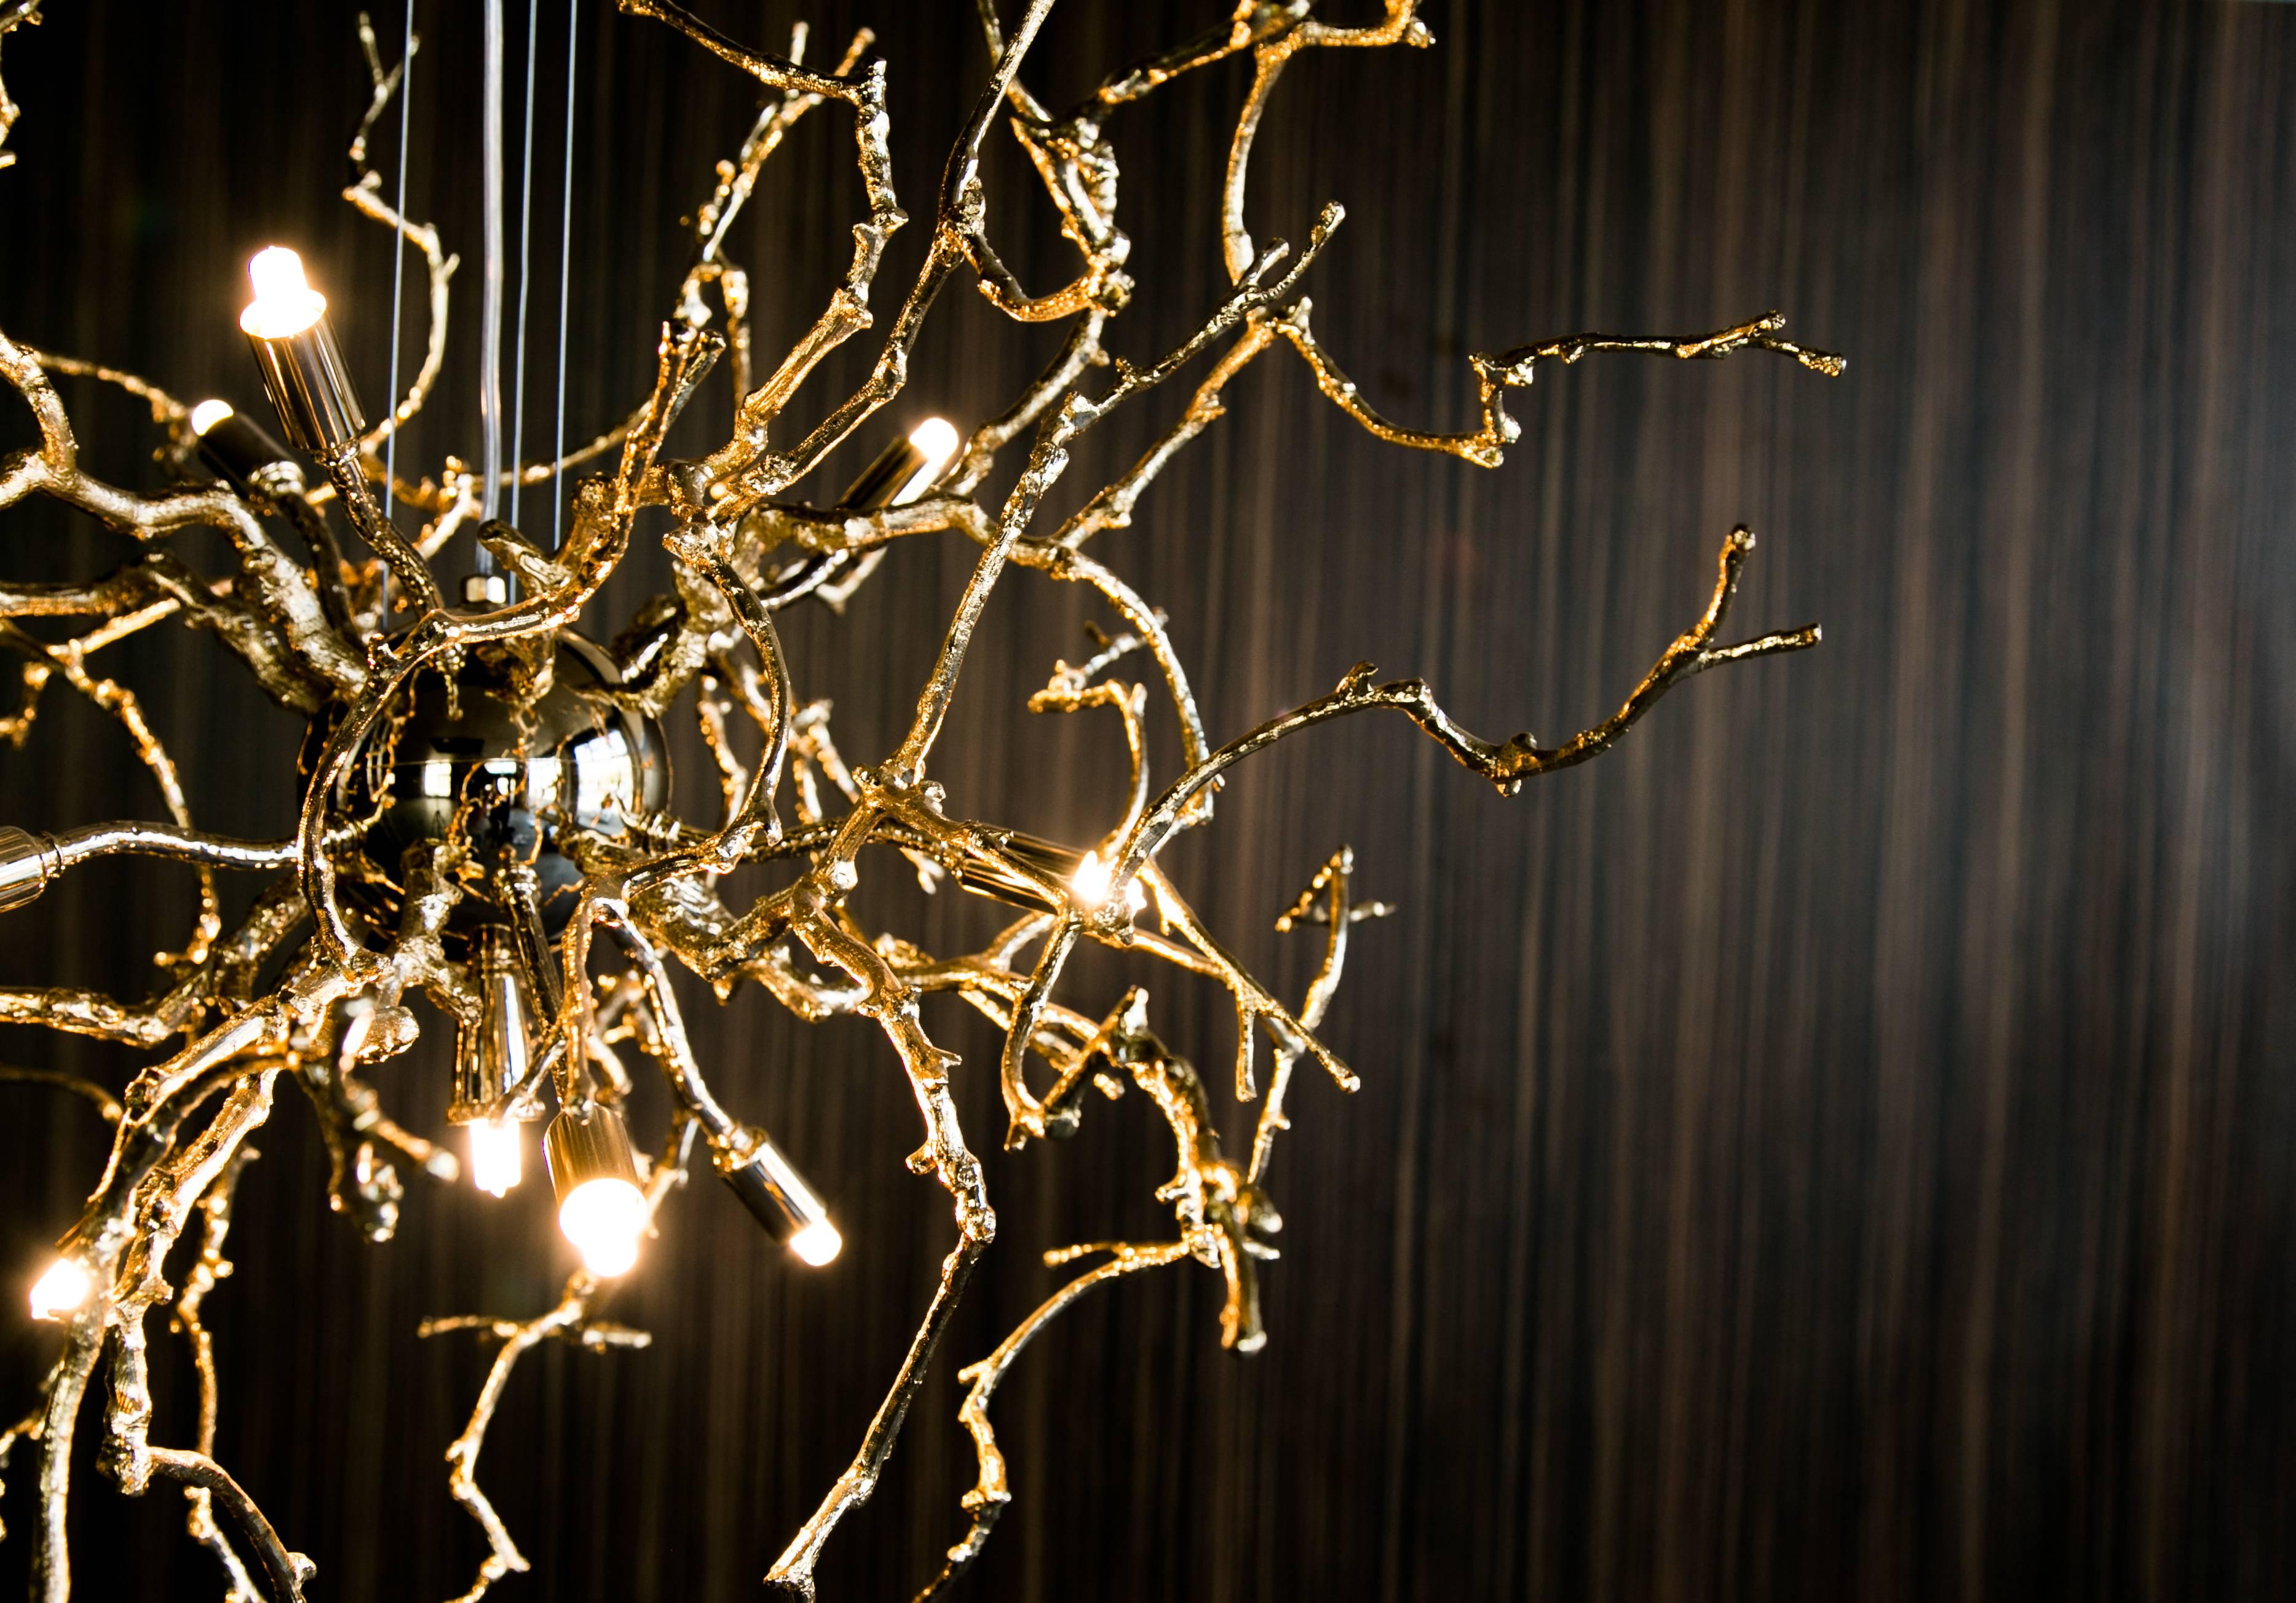 21st century sculptural nodern handmade pendant lamp in brass and lost wax

Pendant lamp
Handmade 
It created with lost wax technique reproducing wine three branches. Exclusive artwork to illuminate every space.

The sculptor, from the